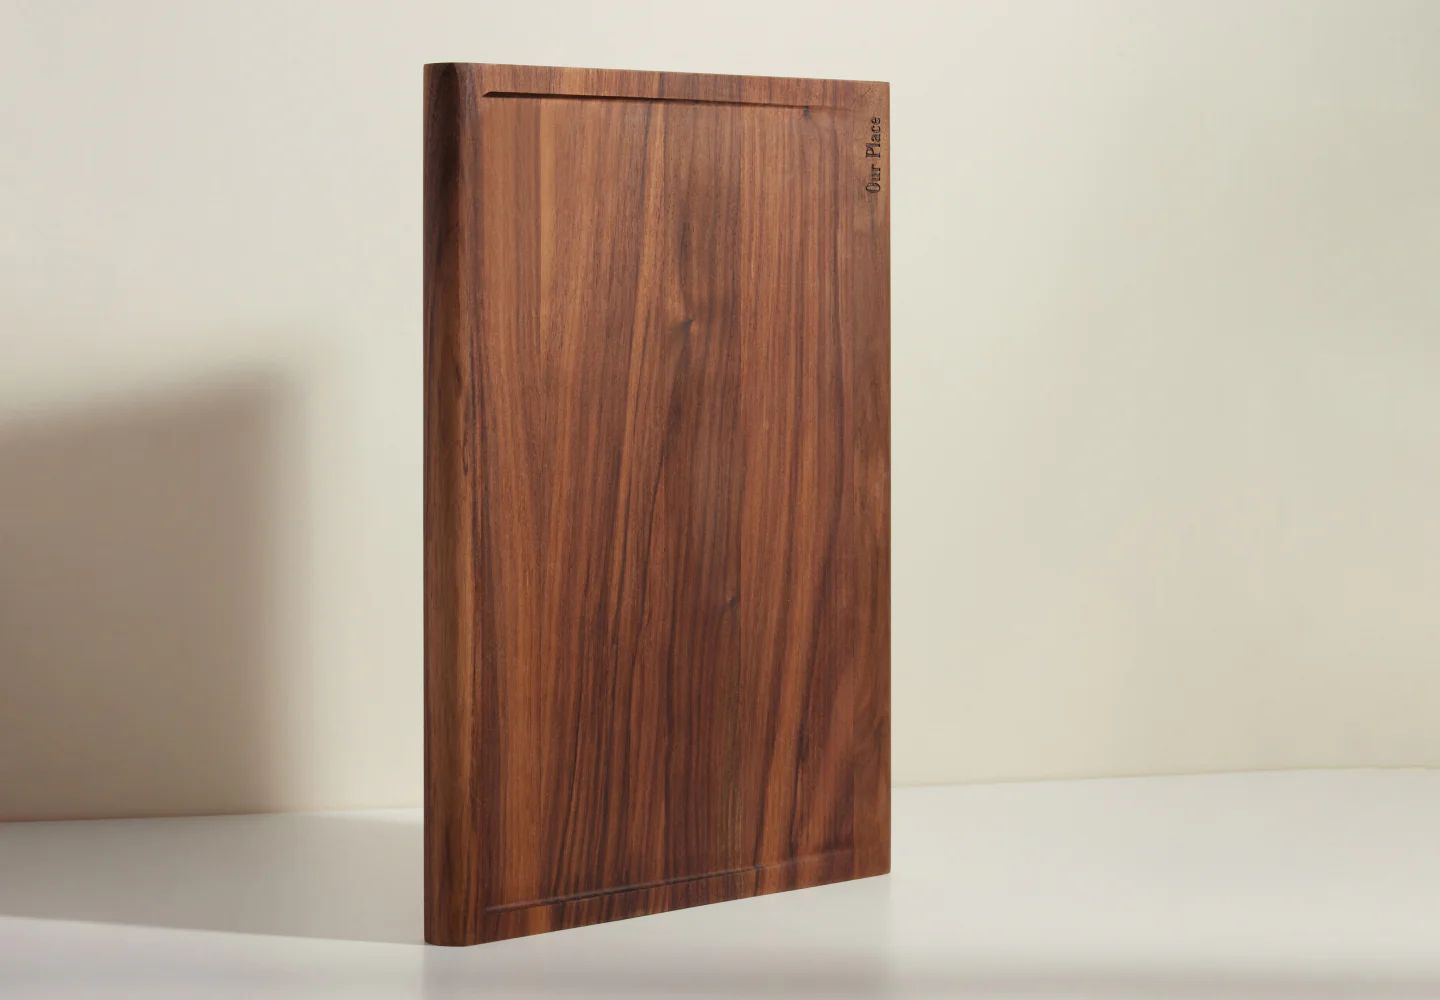 Walnut Cutting Board | Our Place (US)